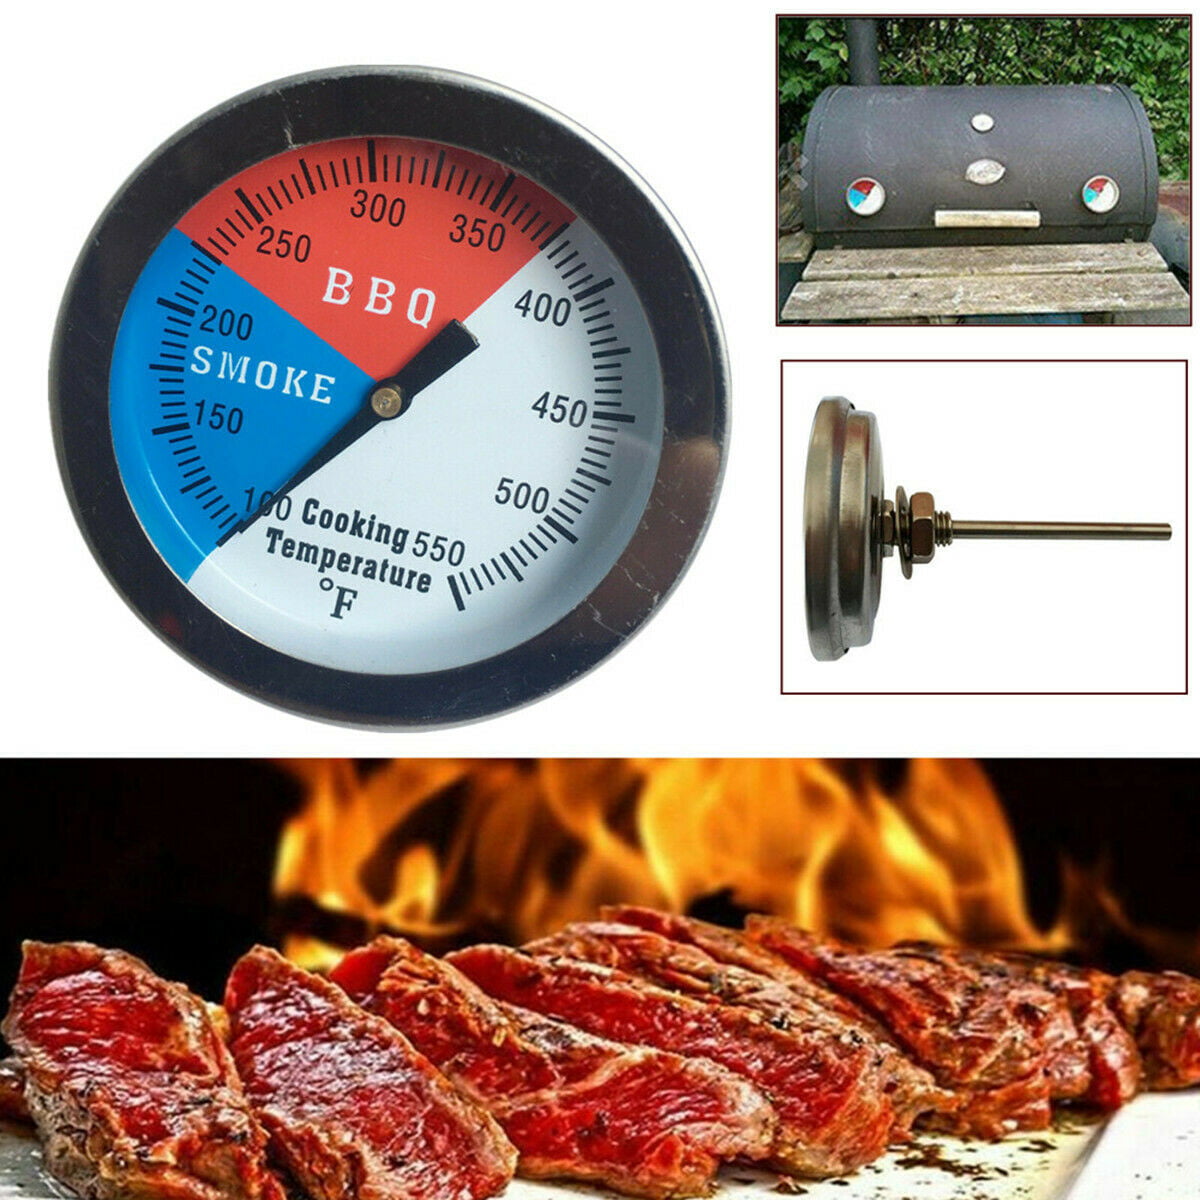 Stainless Steel BBQ Smoker Grill Thermometer， Barbecue Temperature Thermometers Gauge 50-900℉ 